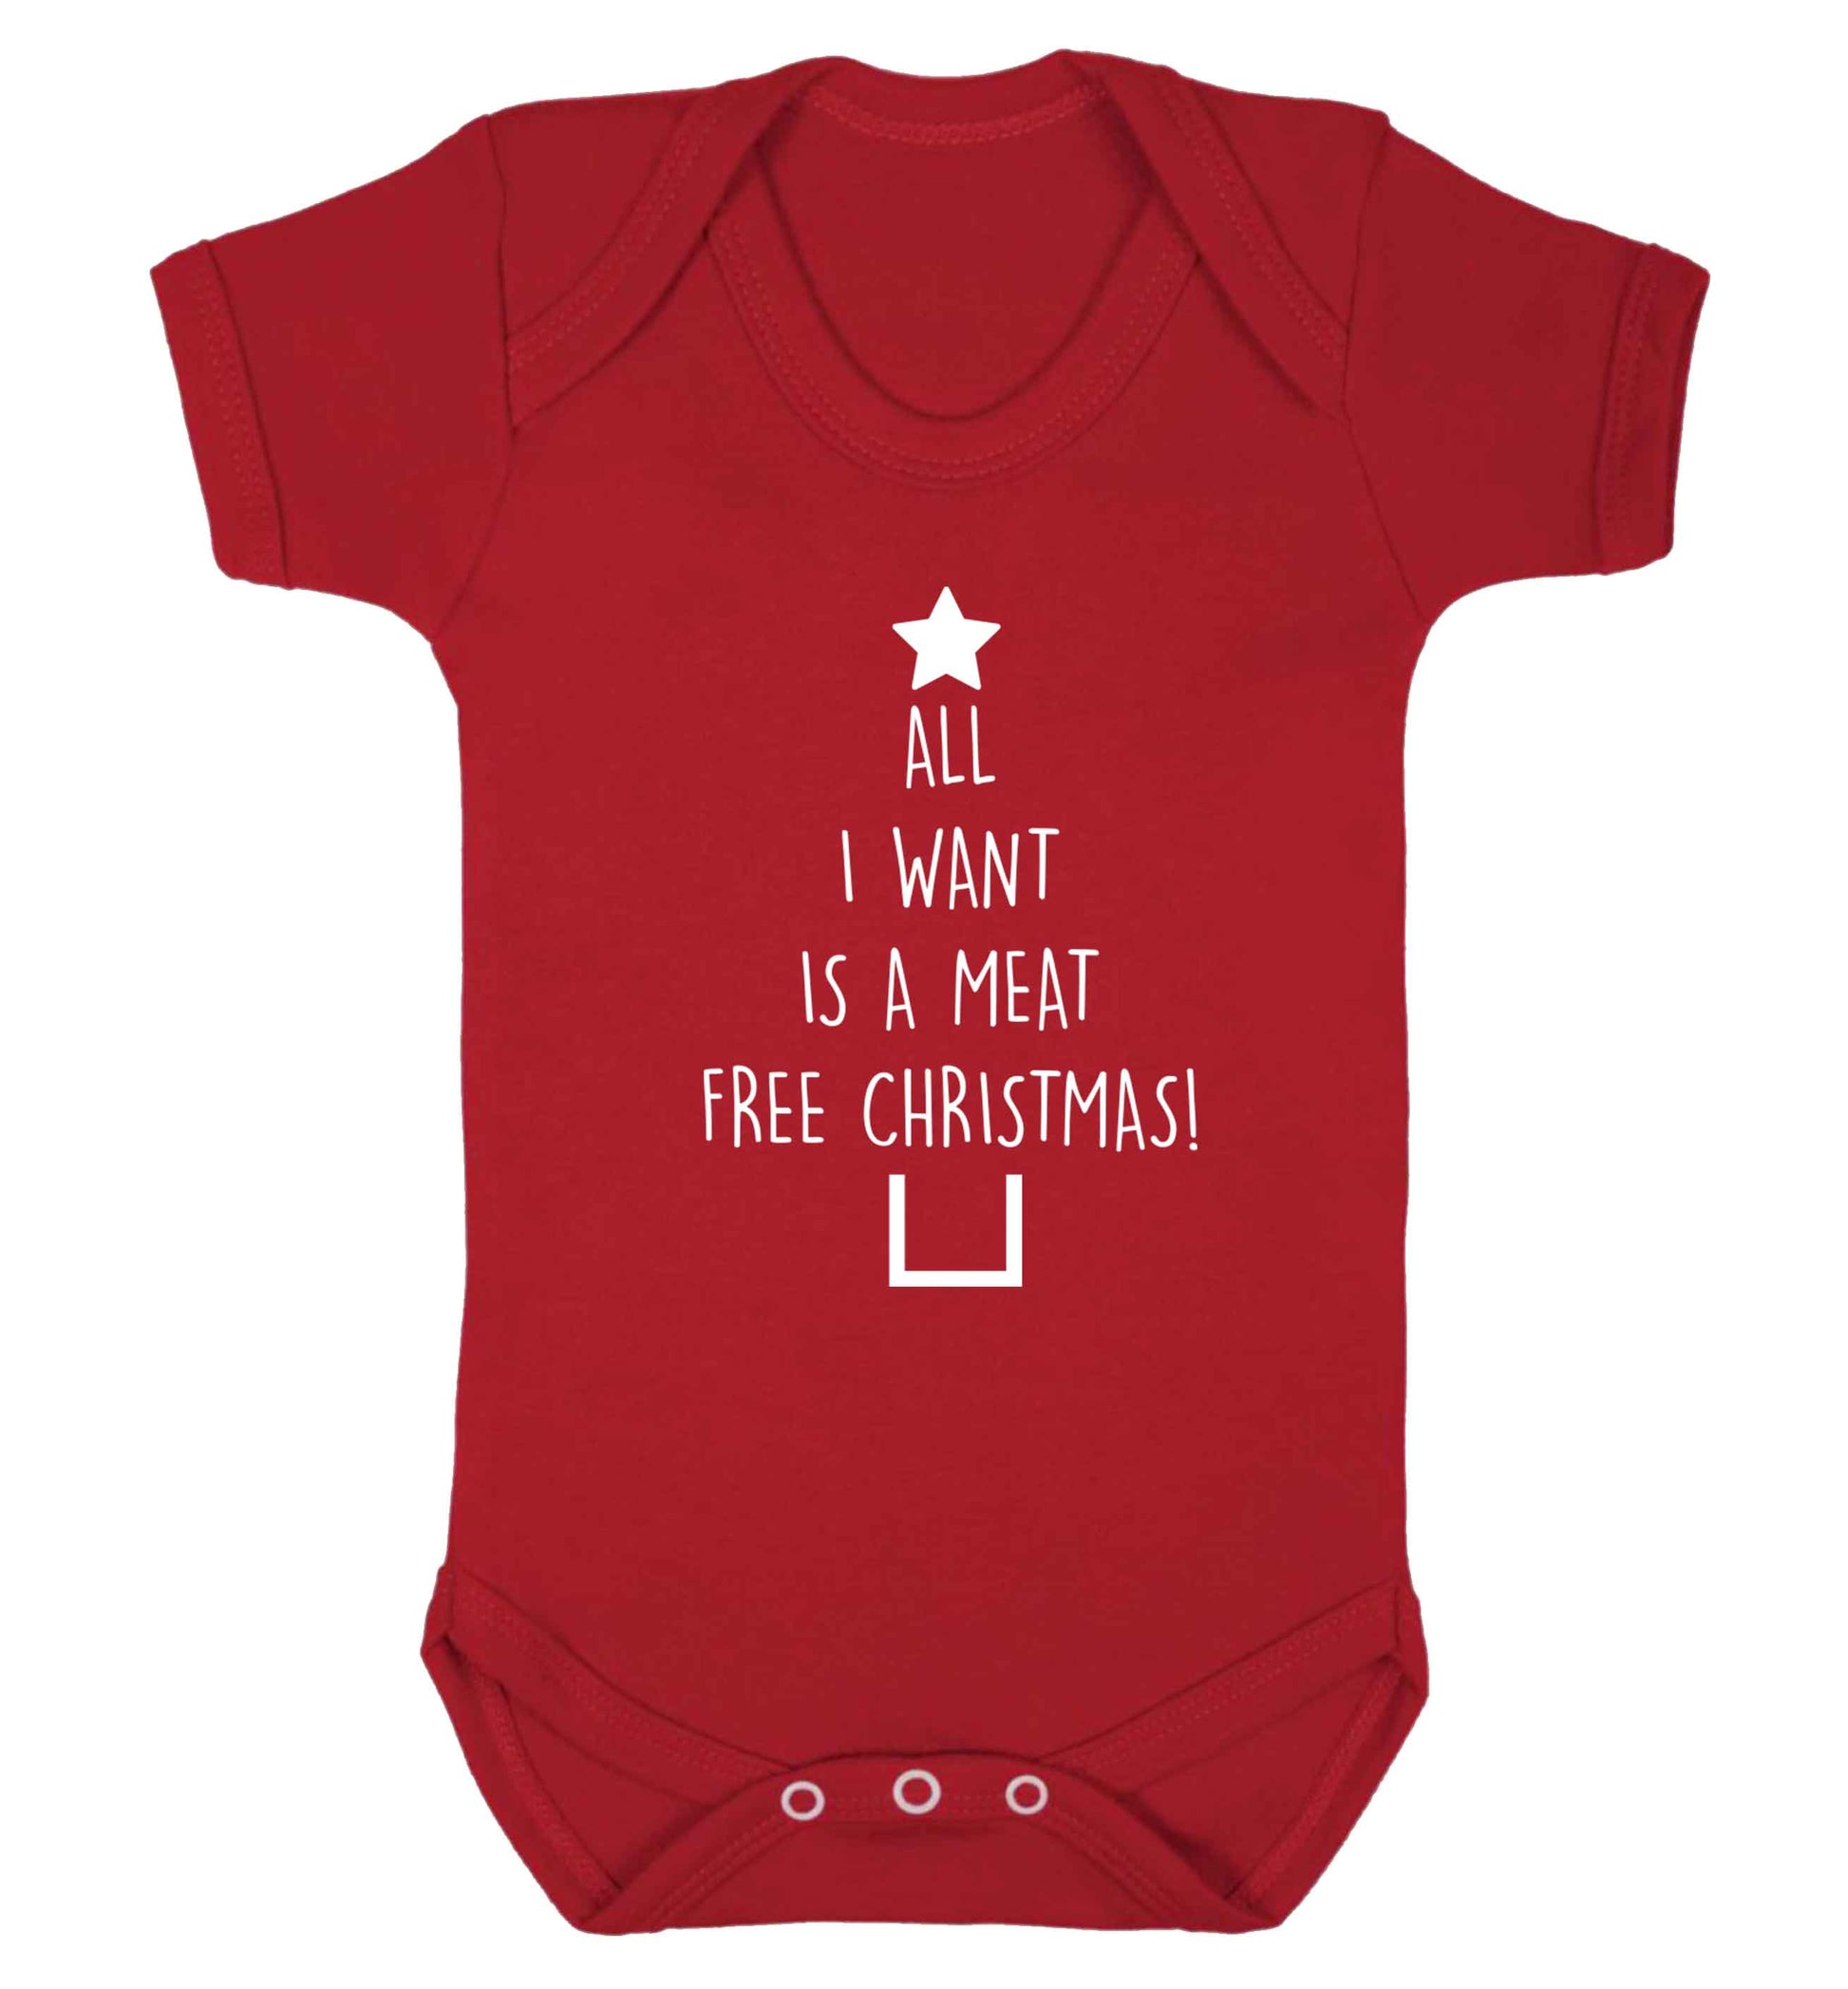 All I want is a meat free Christmas Baby Vest red 18-24 months